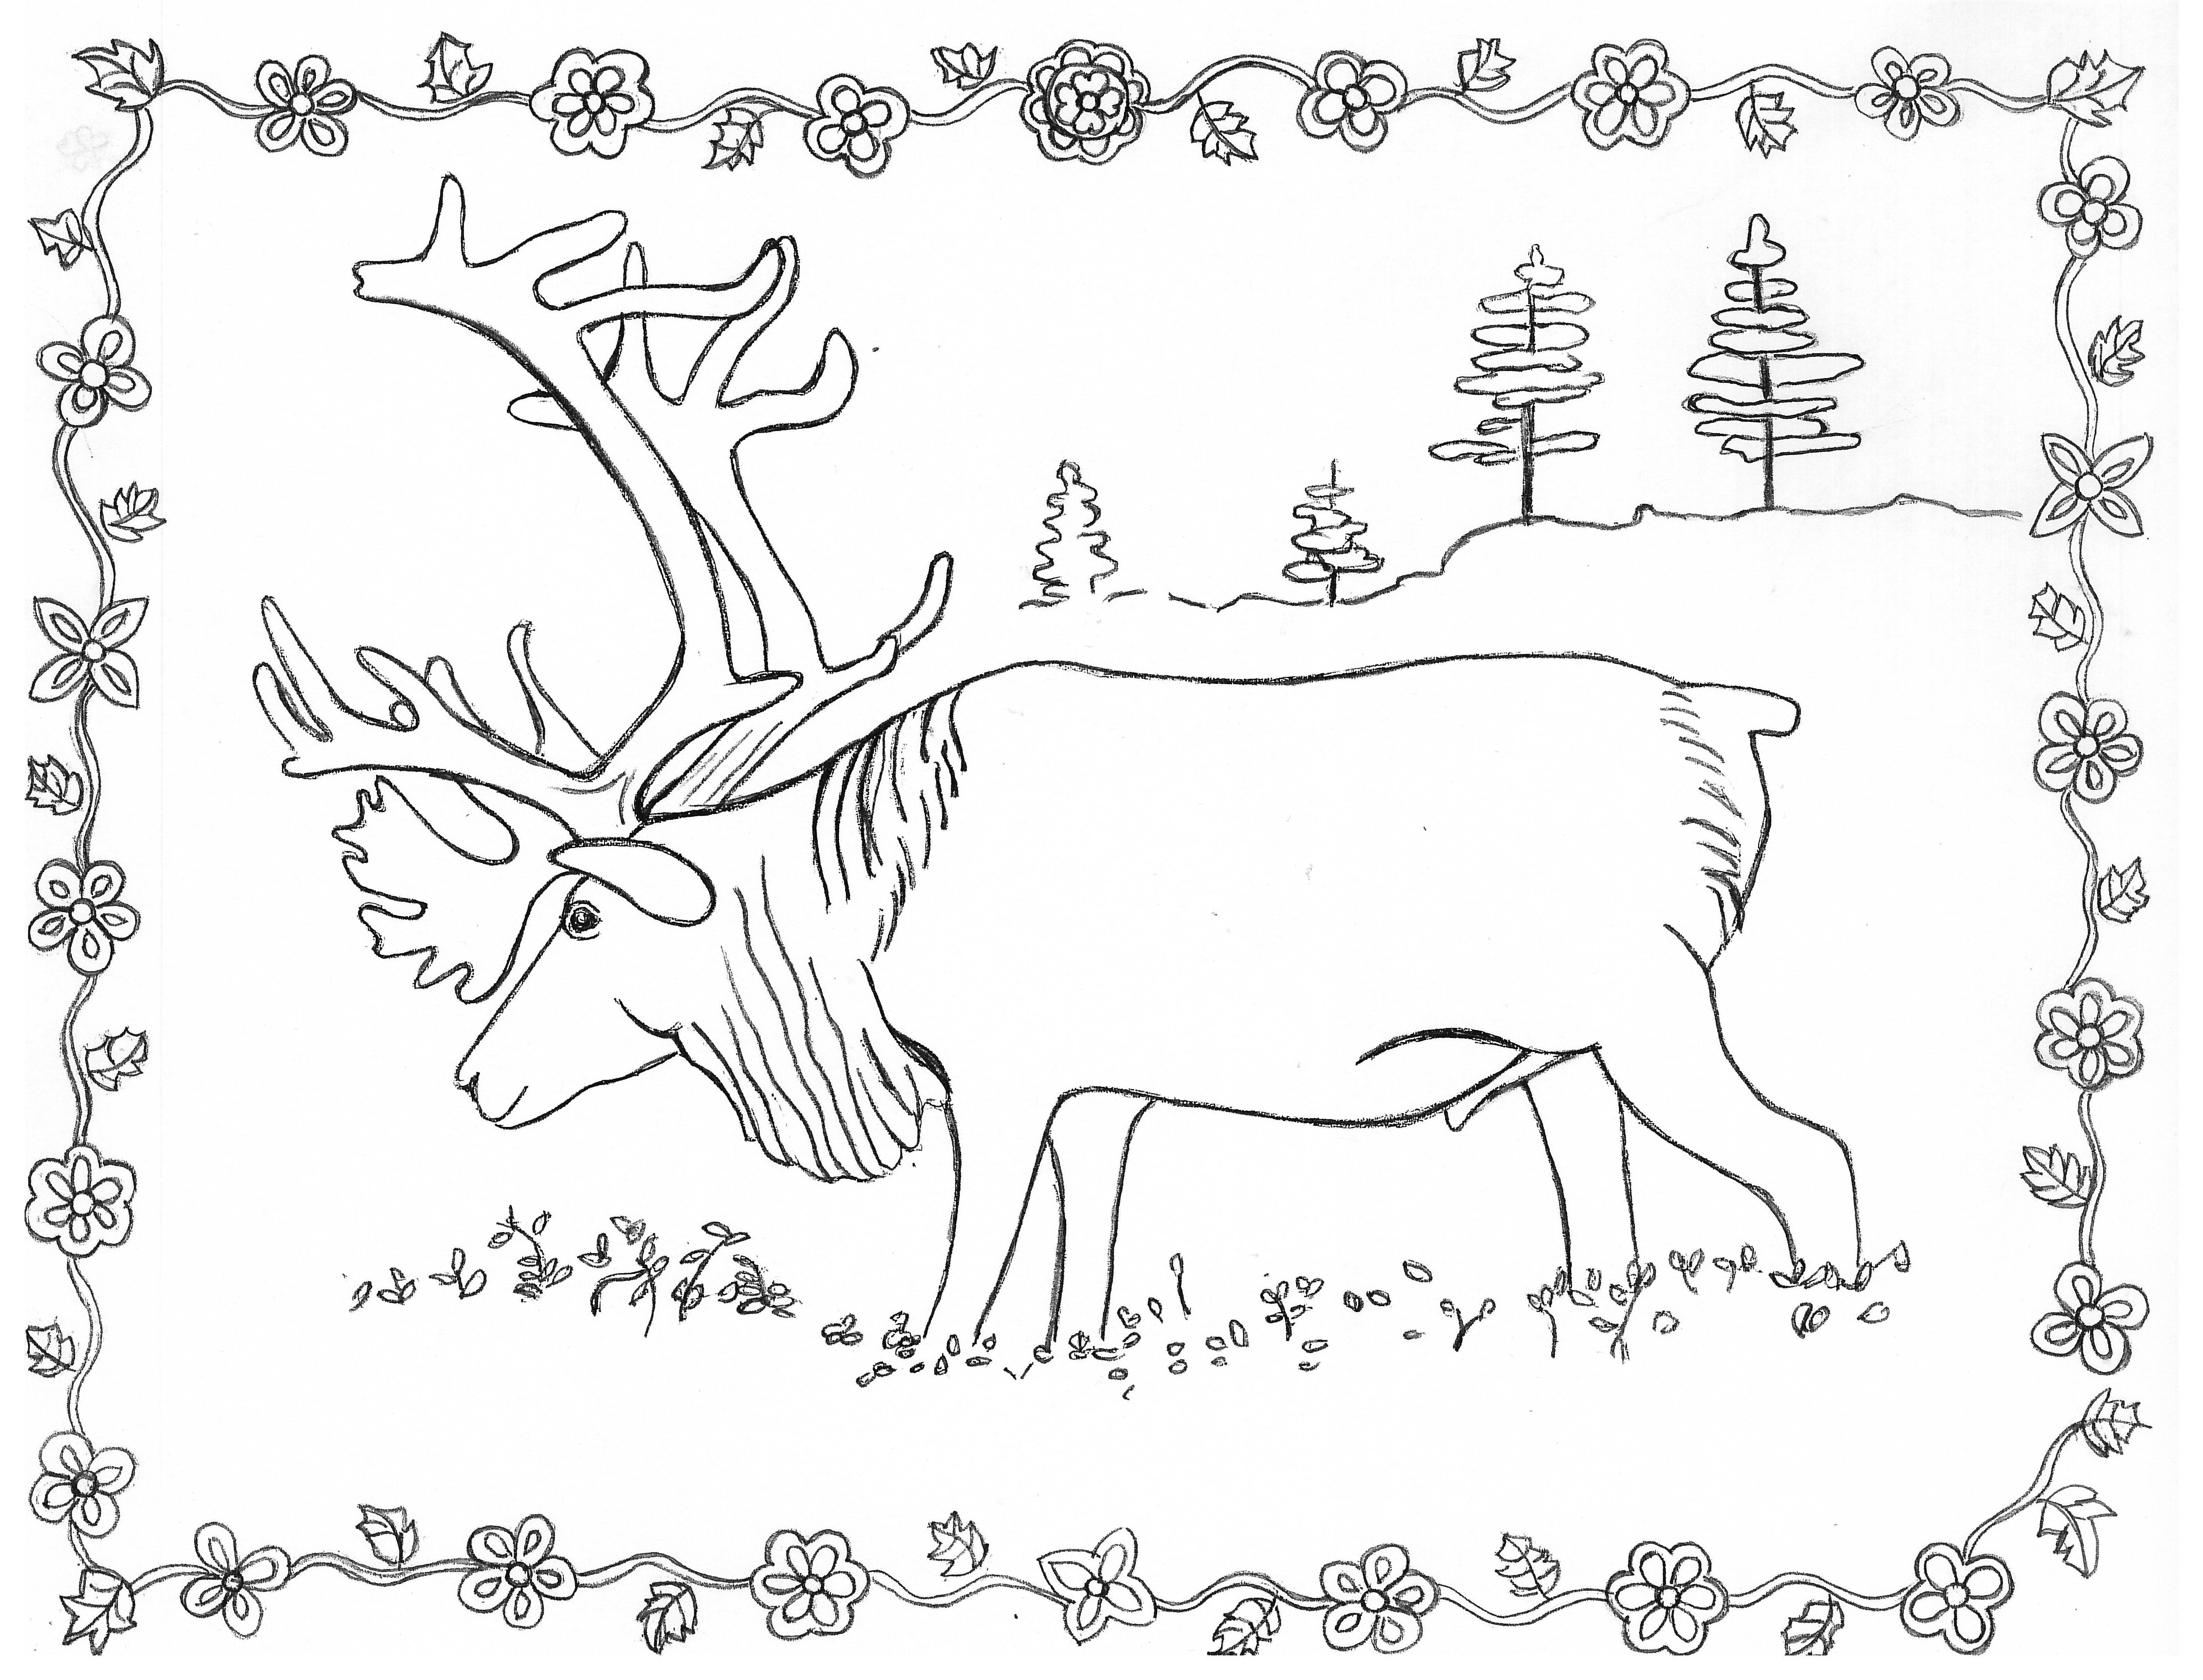 forest habitat coloring pages